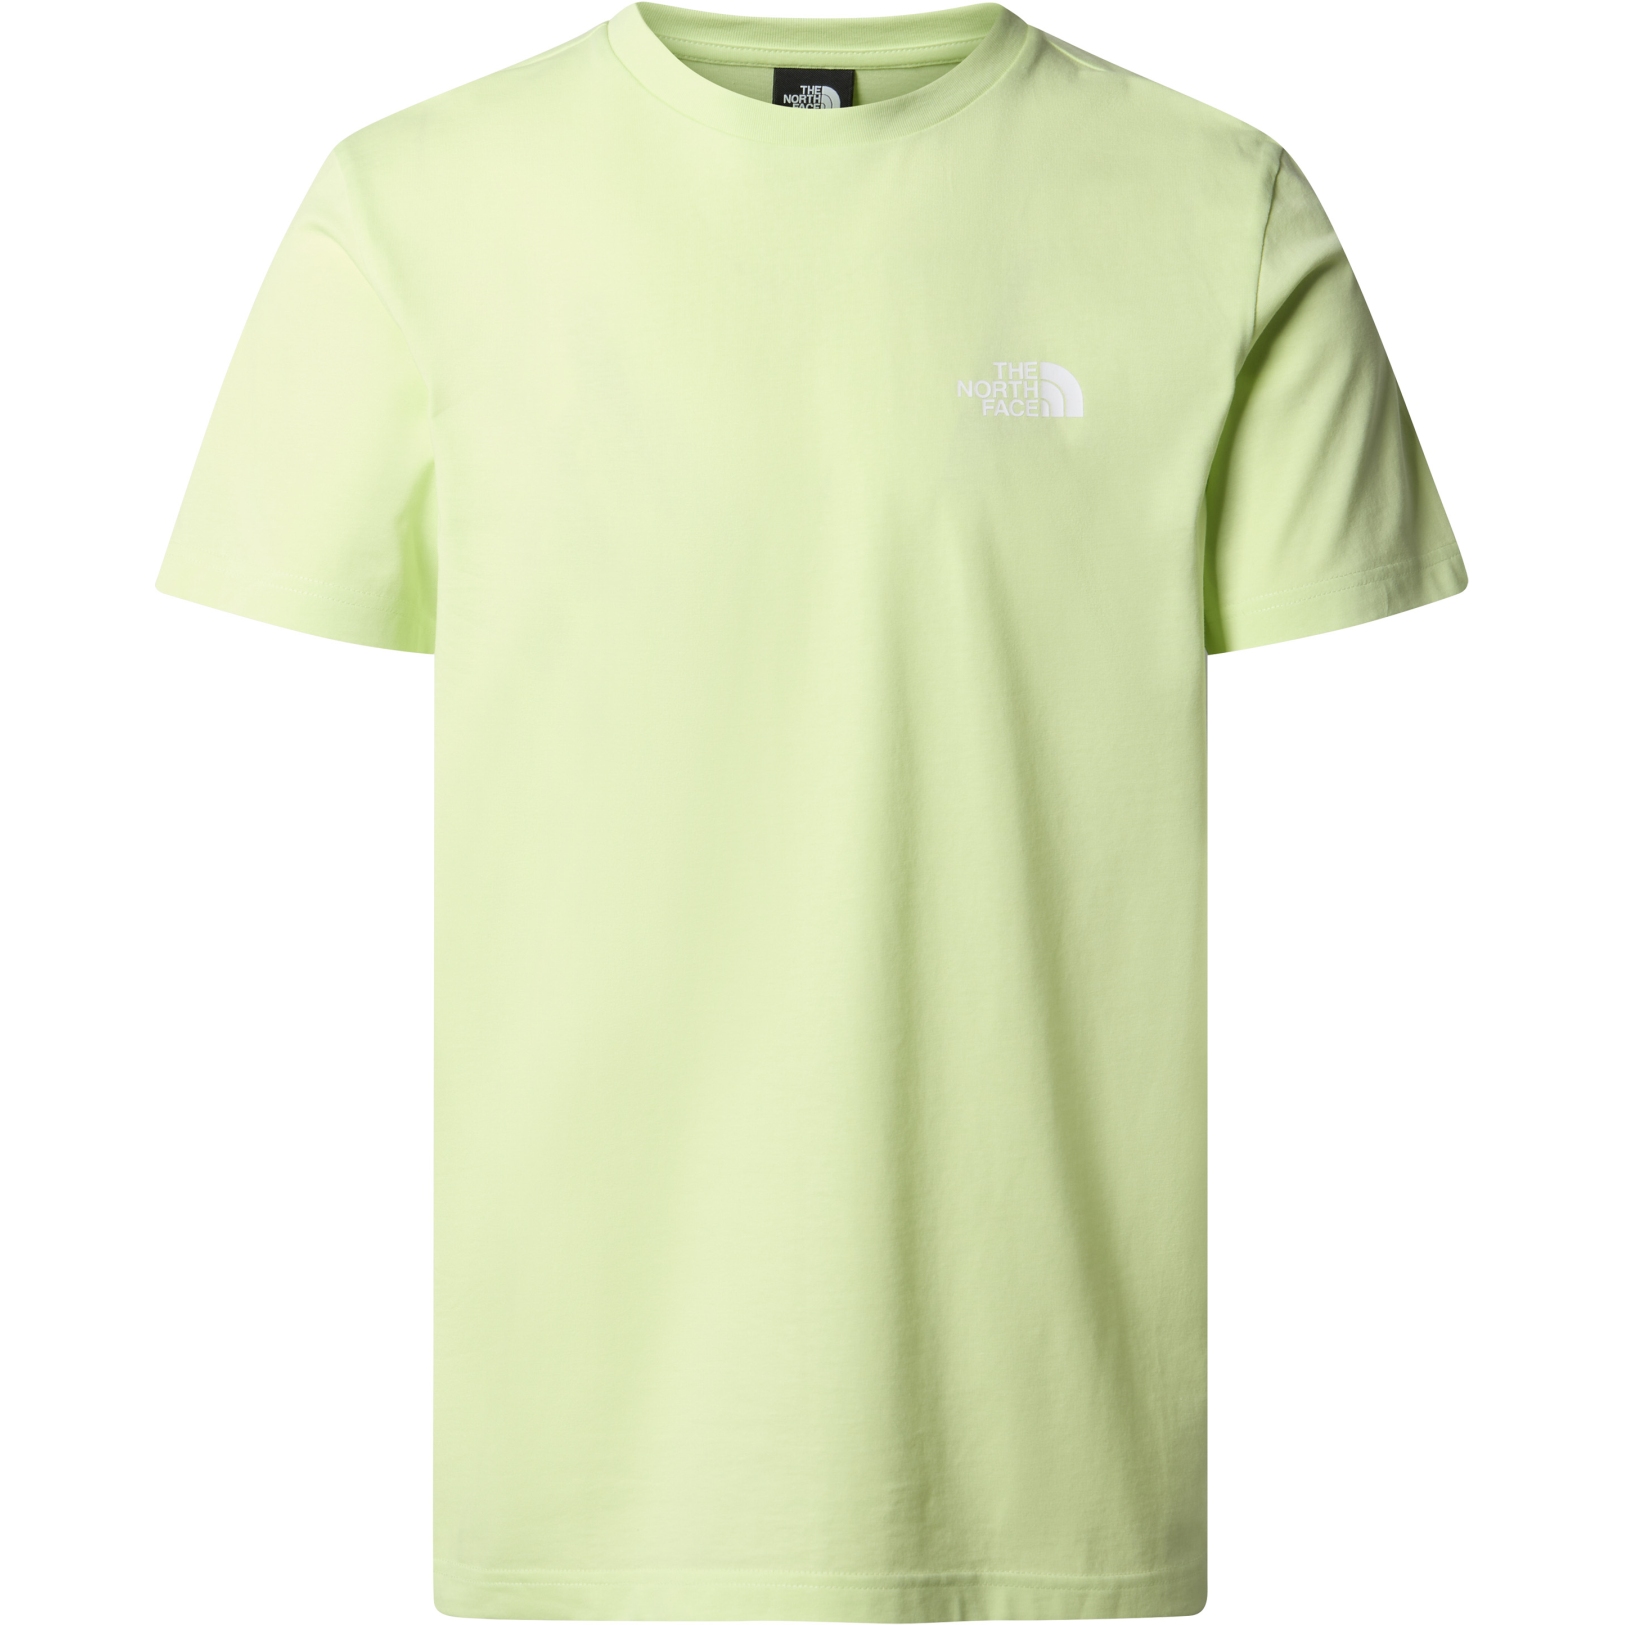 Productfoto van The North Face Simple Dome T-Shirt Heren - Astro Lime